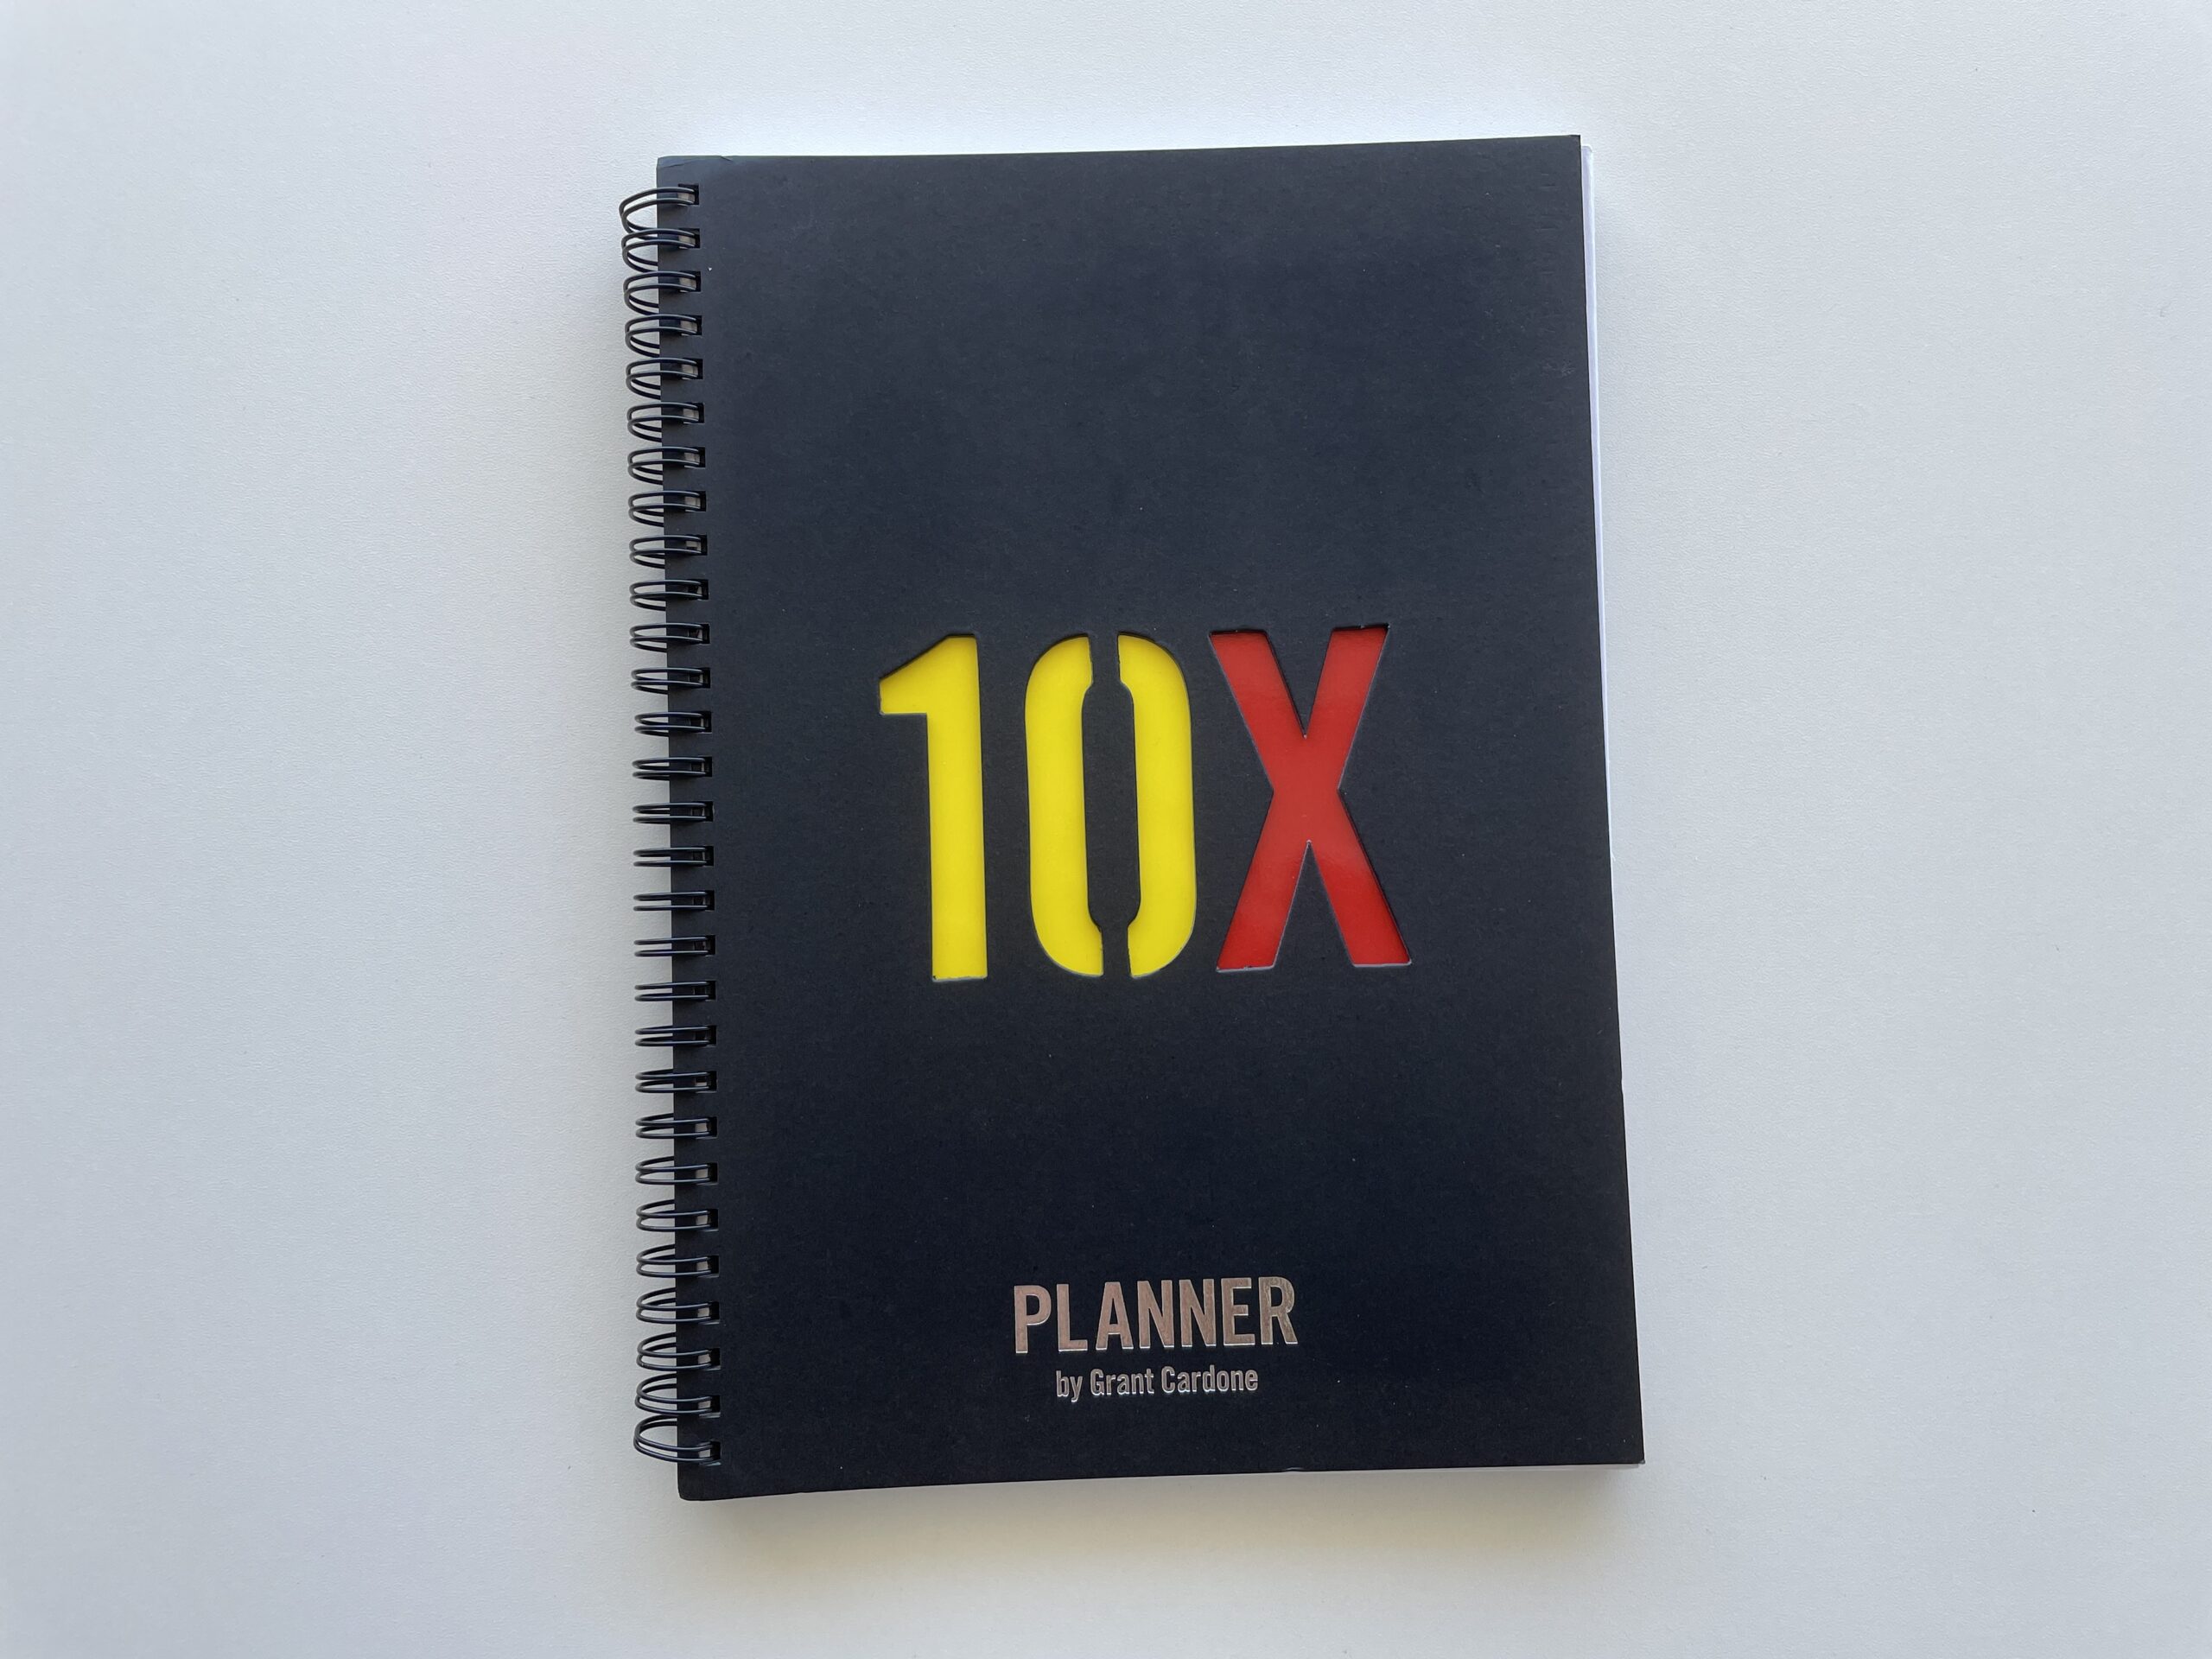 10x planner review grant cardone daily planner day to a page layout timed schedule minimalist business self employed student goals